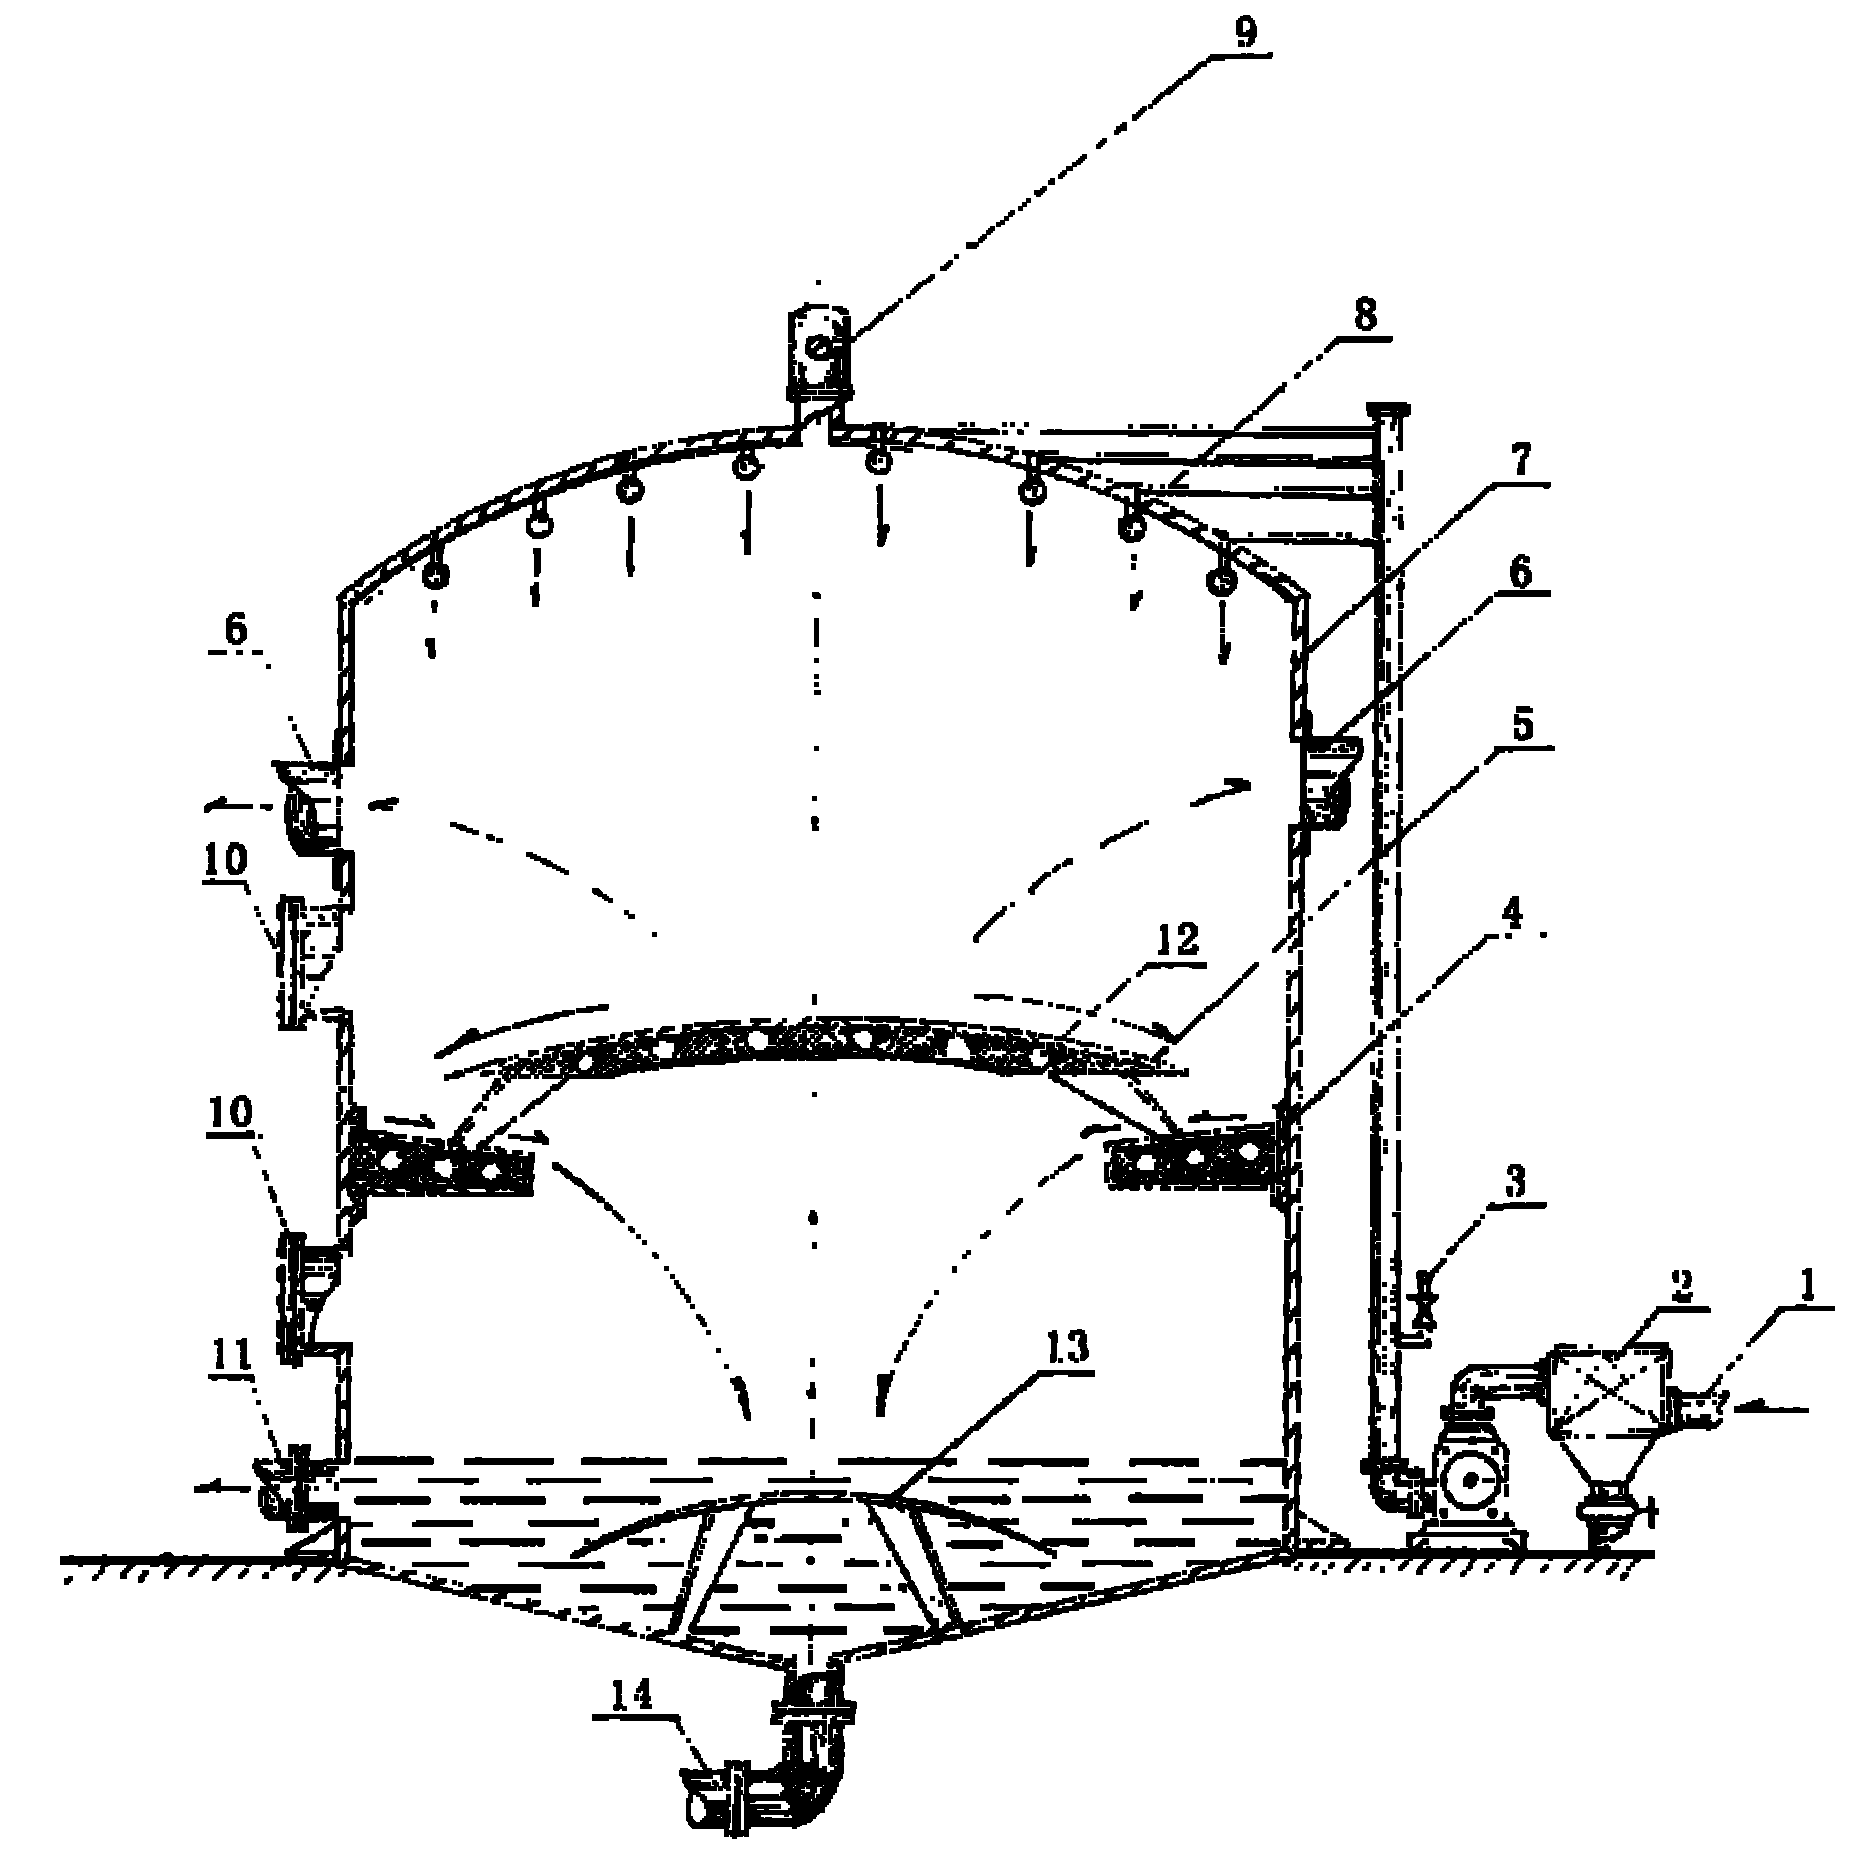 Sewage treatment system equipment for absolute quantification of sludge and method for recycling sewage